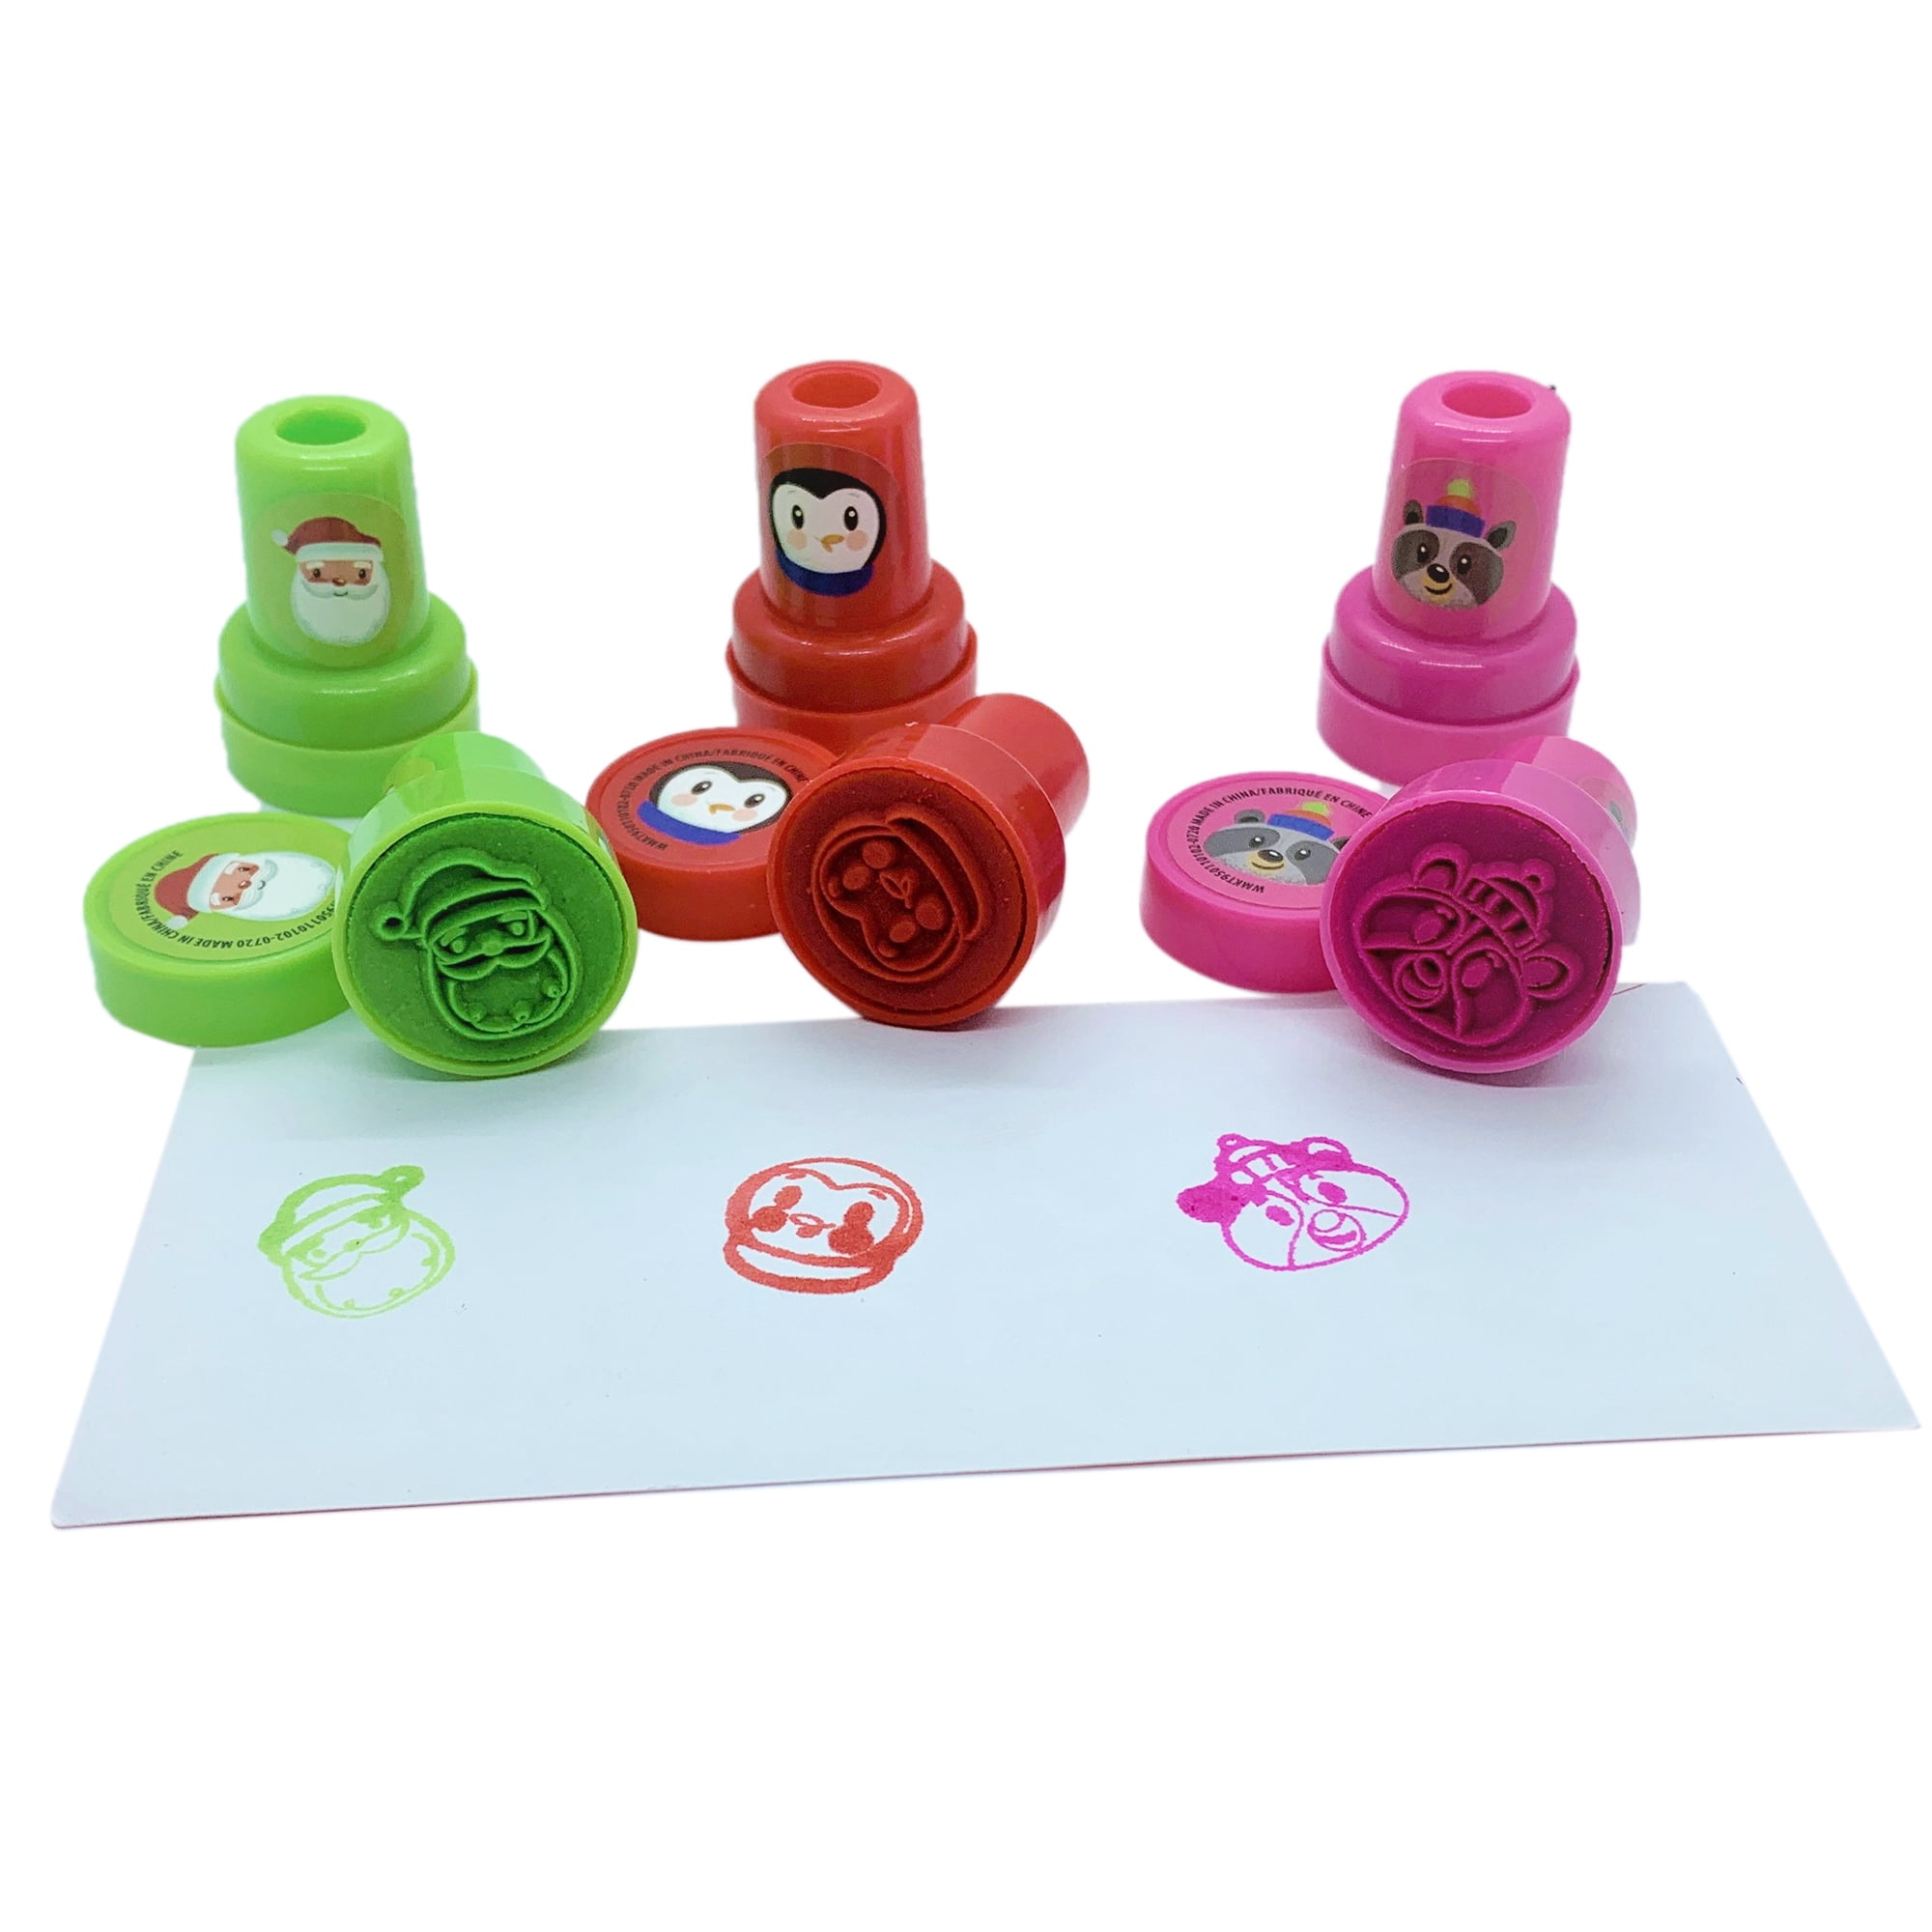 Custom rubber stamps - The stocking stuffer to end all stocking